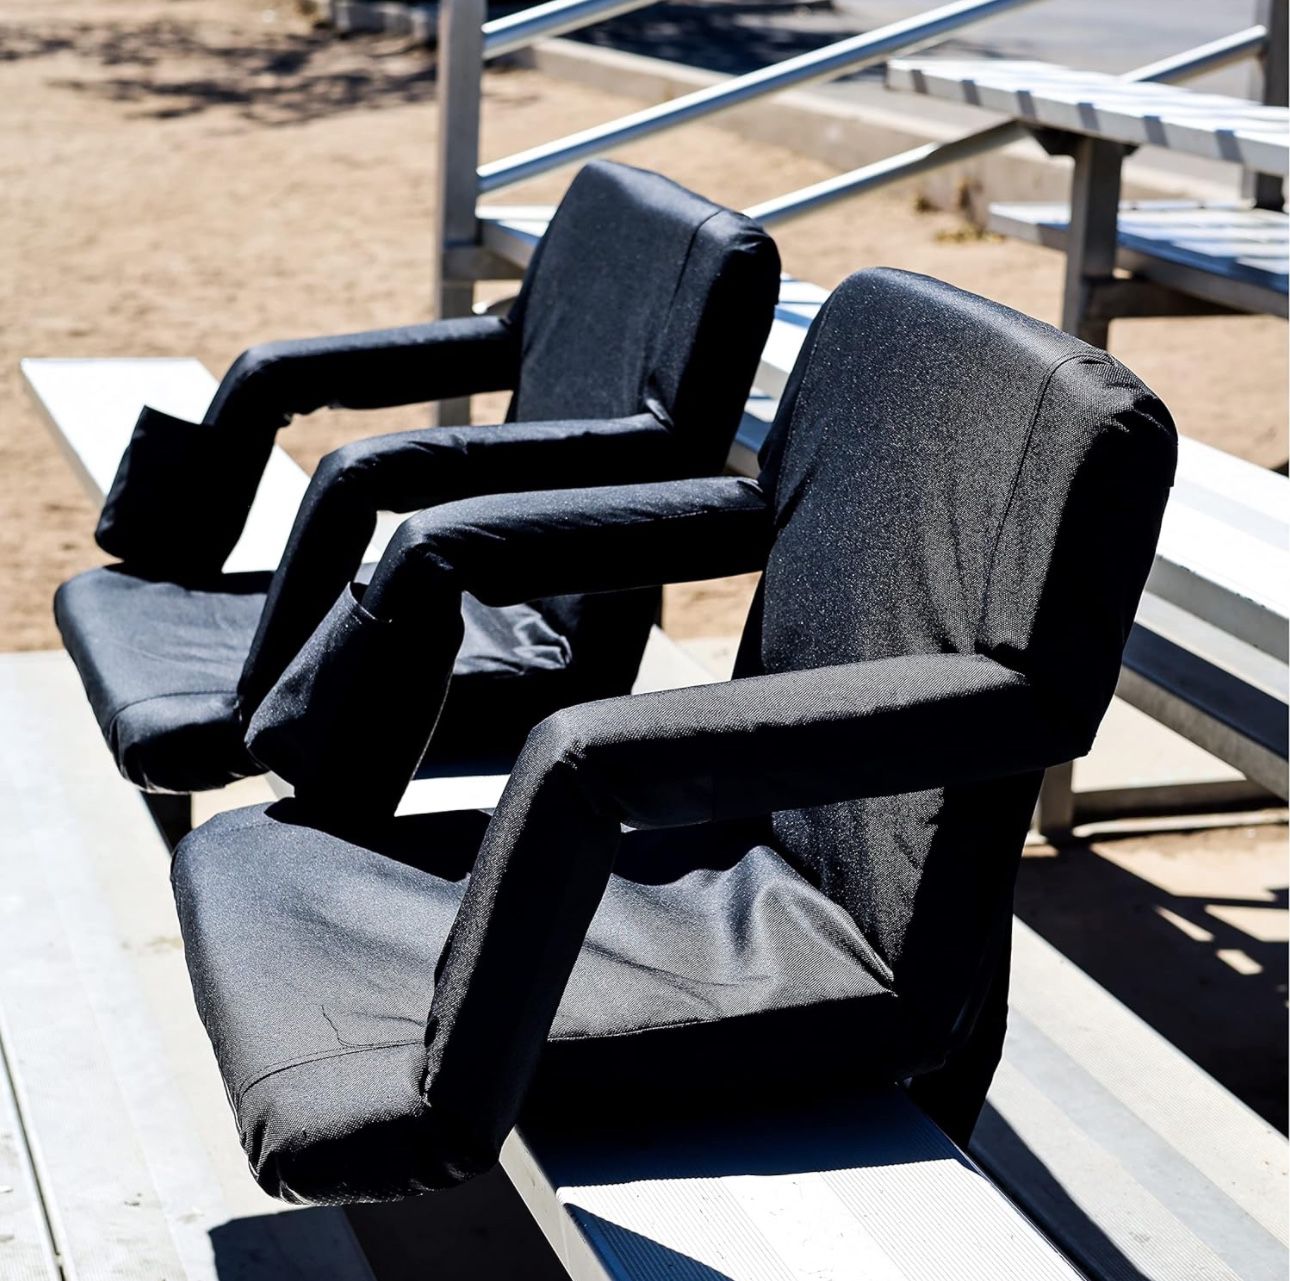 Set of 2 stadium seat chairs for stands